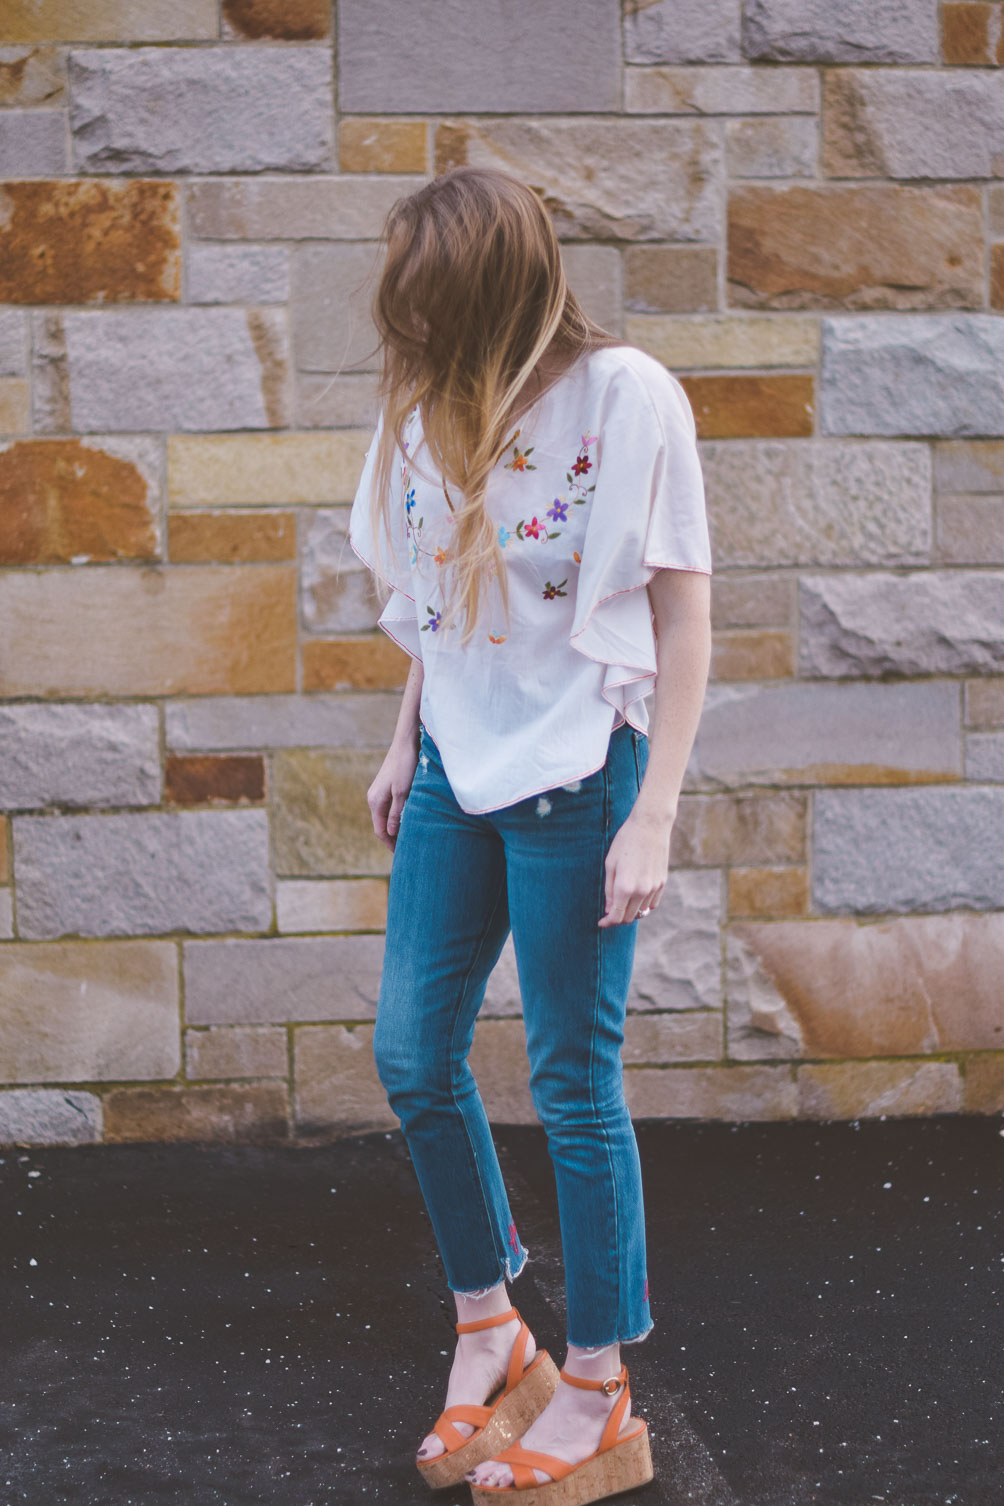 wearing an embroidered vintage top for spring with raw edge denim and cork platform sandals